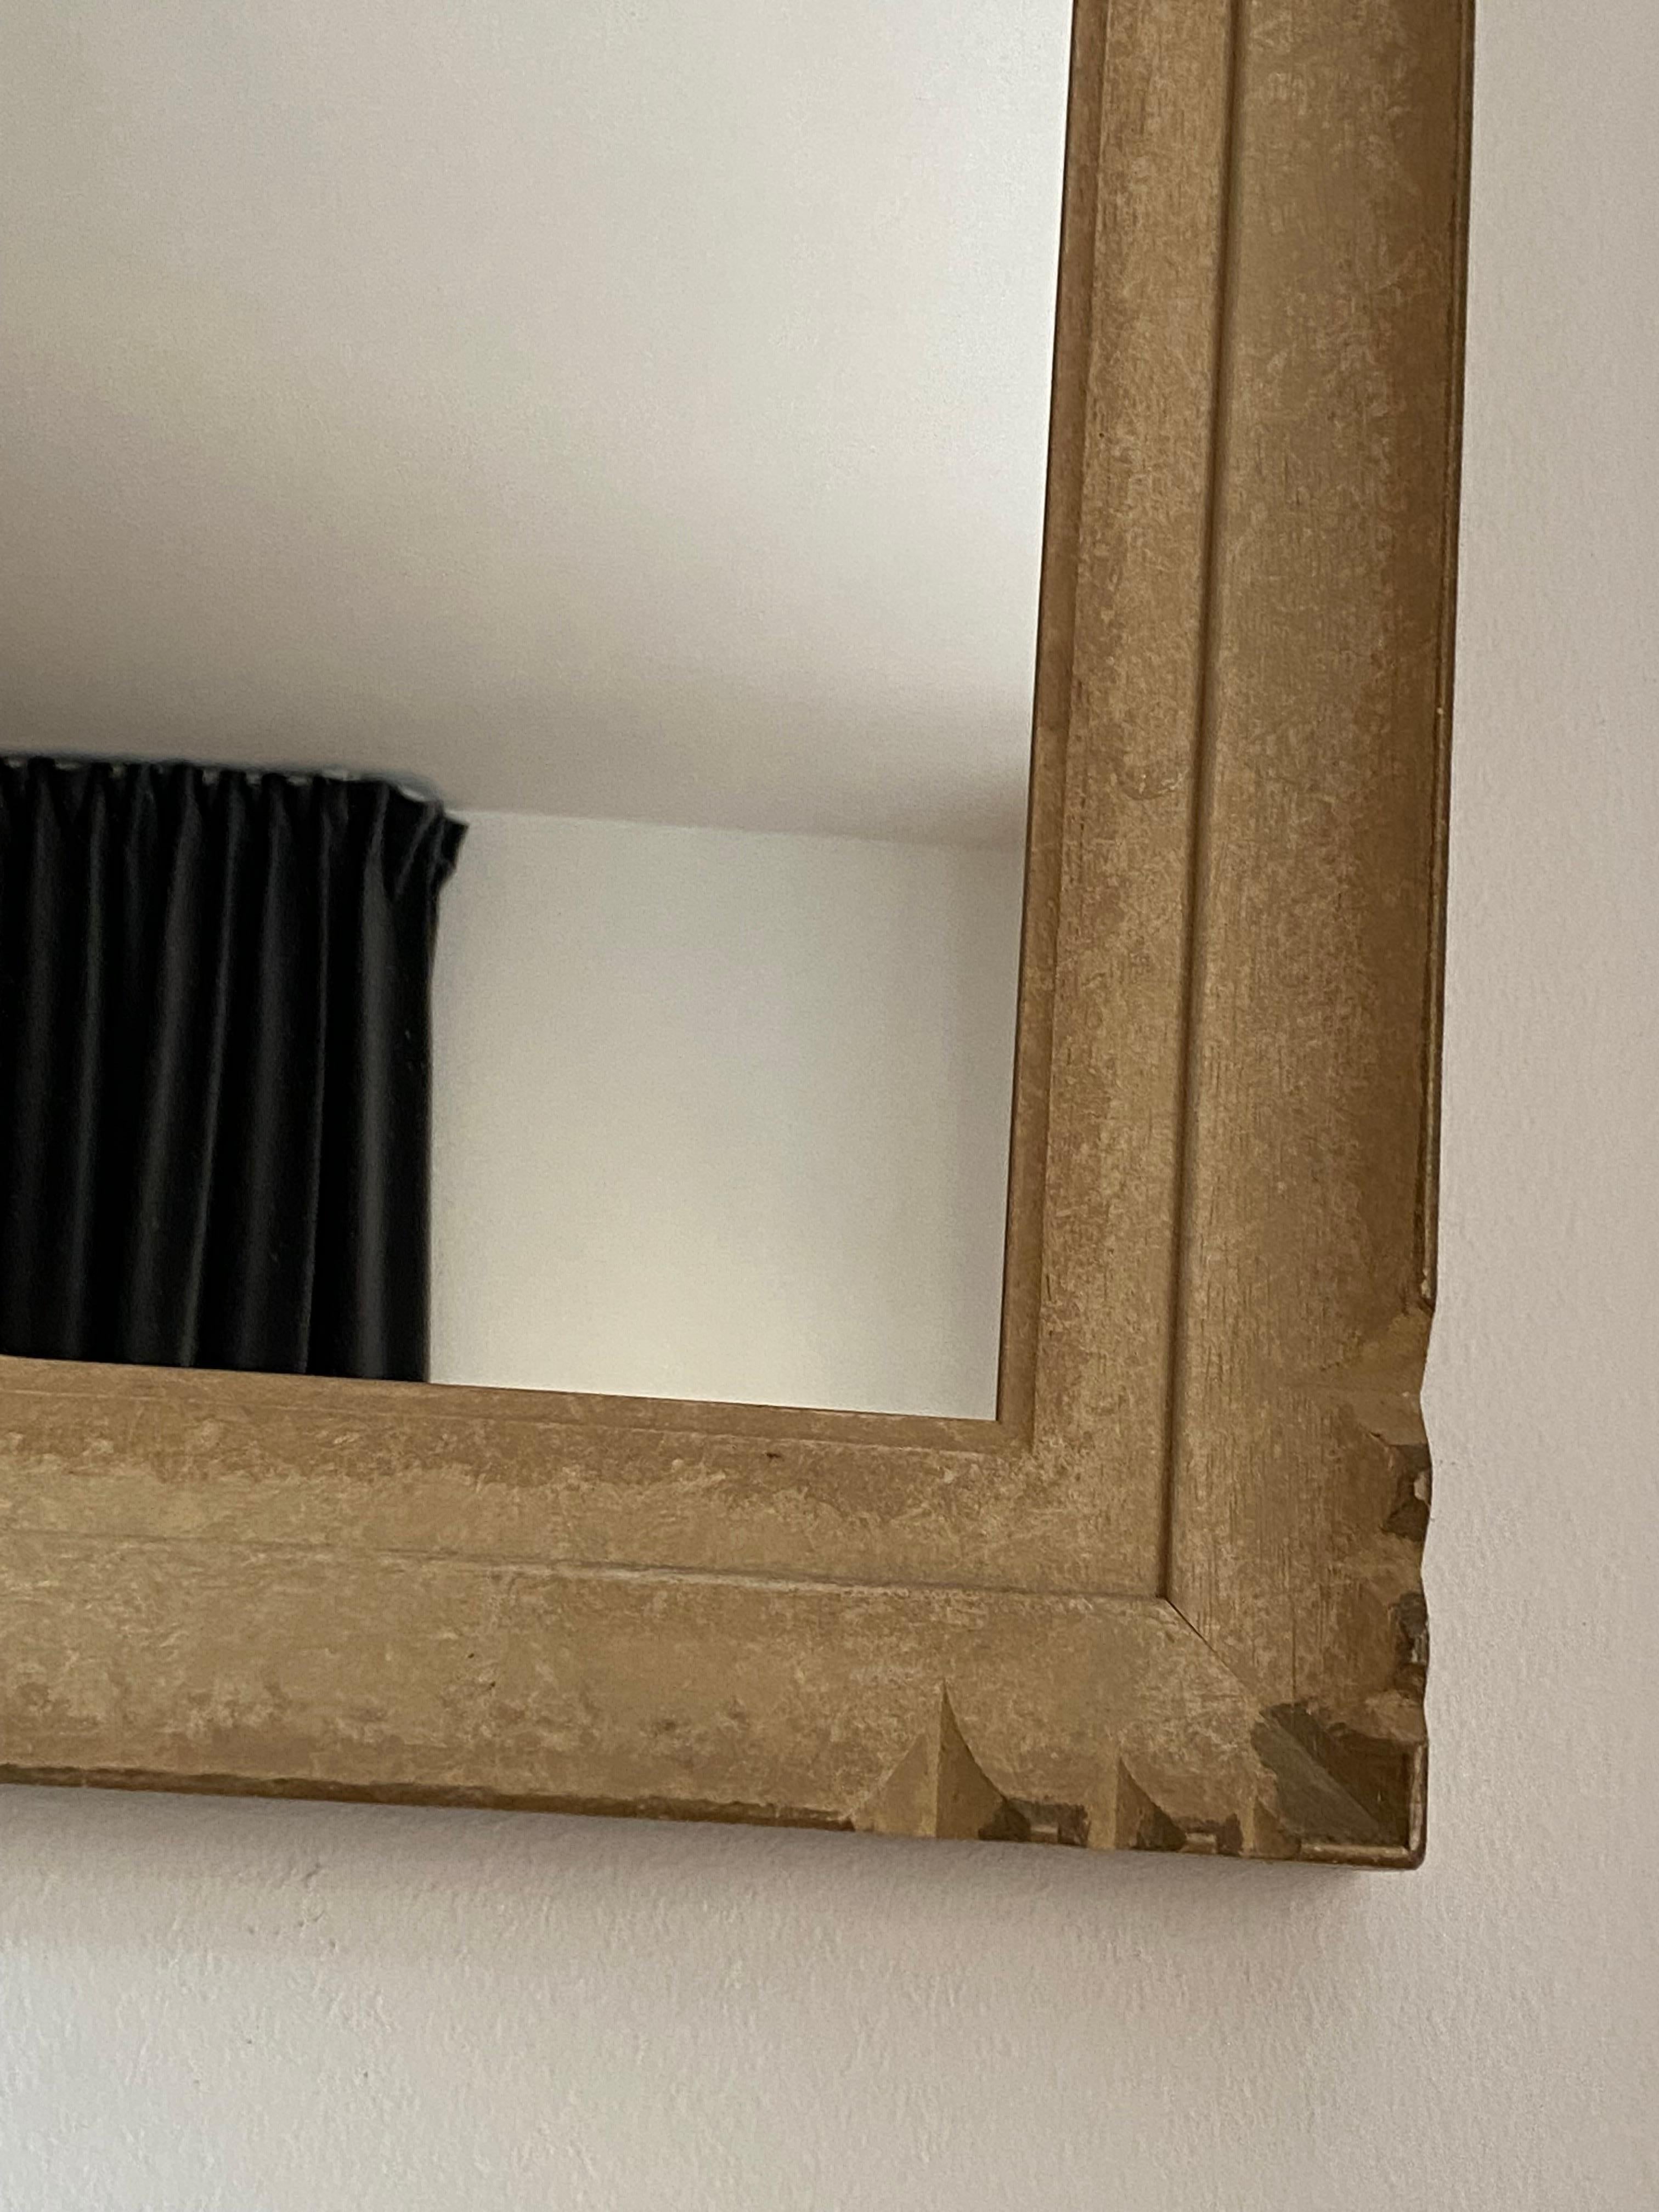 A wall mirror, produced in Italy, 1940s. Finely sculpted wooden frame is painted and partly gilded edges.

Other designers of the period include Gio Ponti, Diego Giacometti, Max Ingrand, Franco Albini, and Josef Frank.